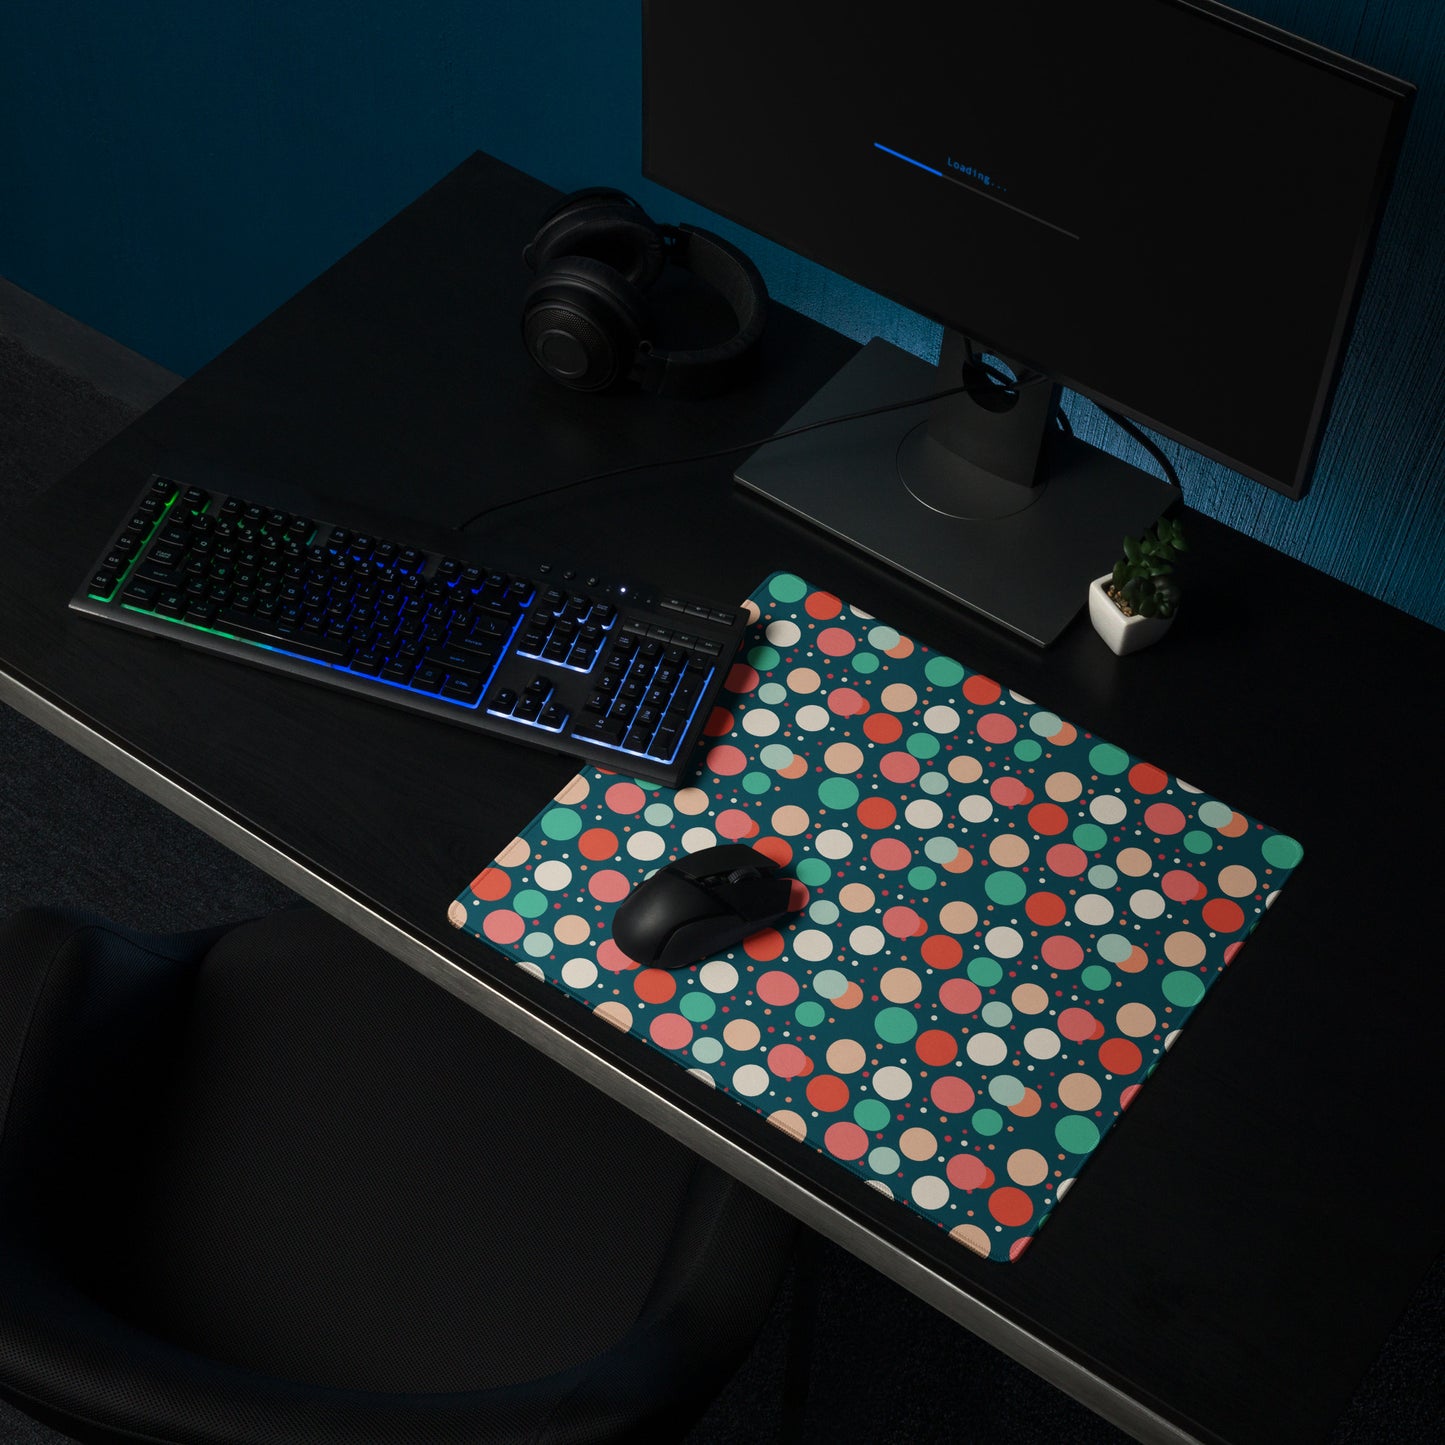  A 18" x 16" desk pad with red teal and yellow polka dot pattern sitting on a desk.